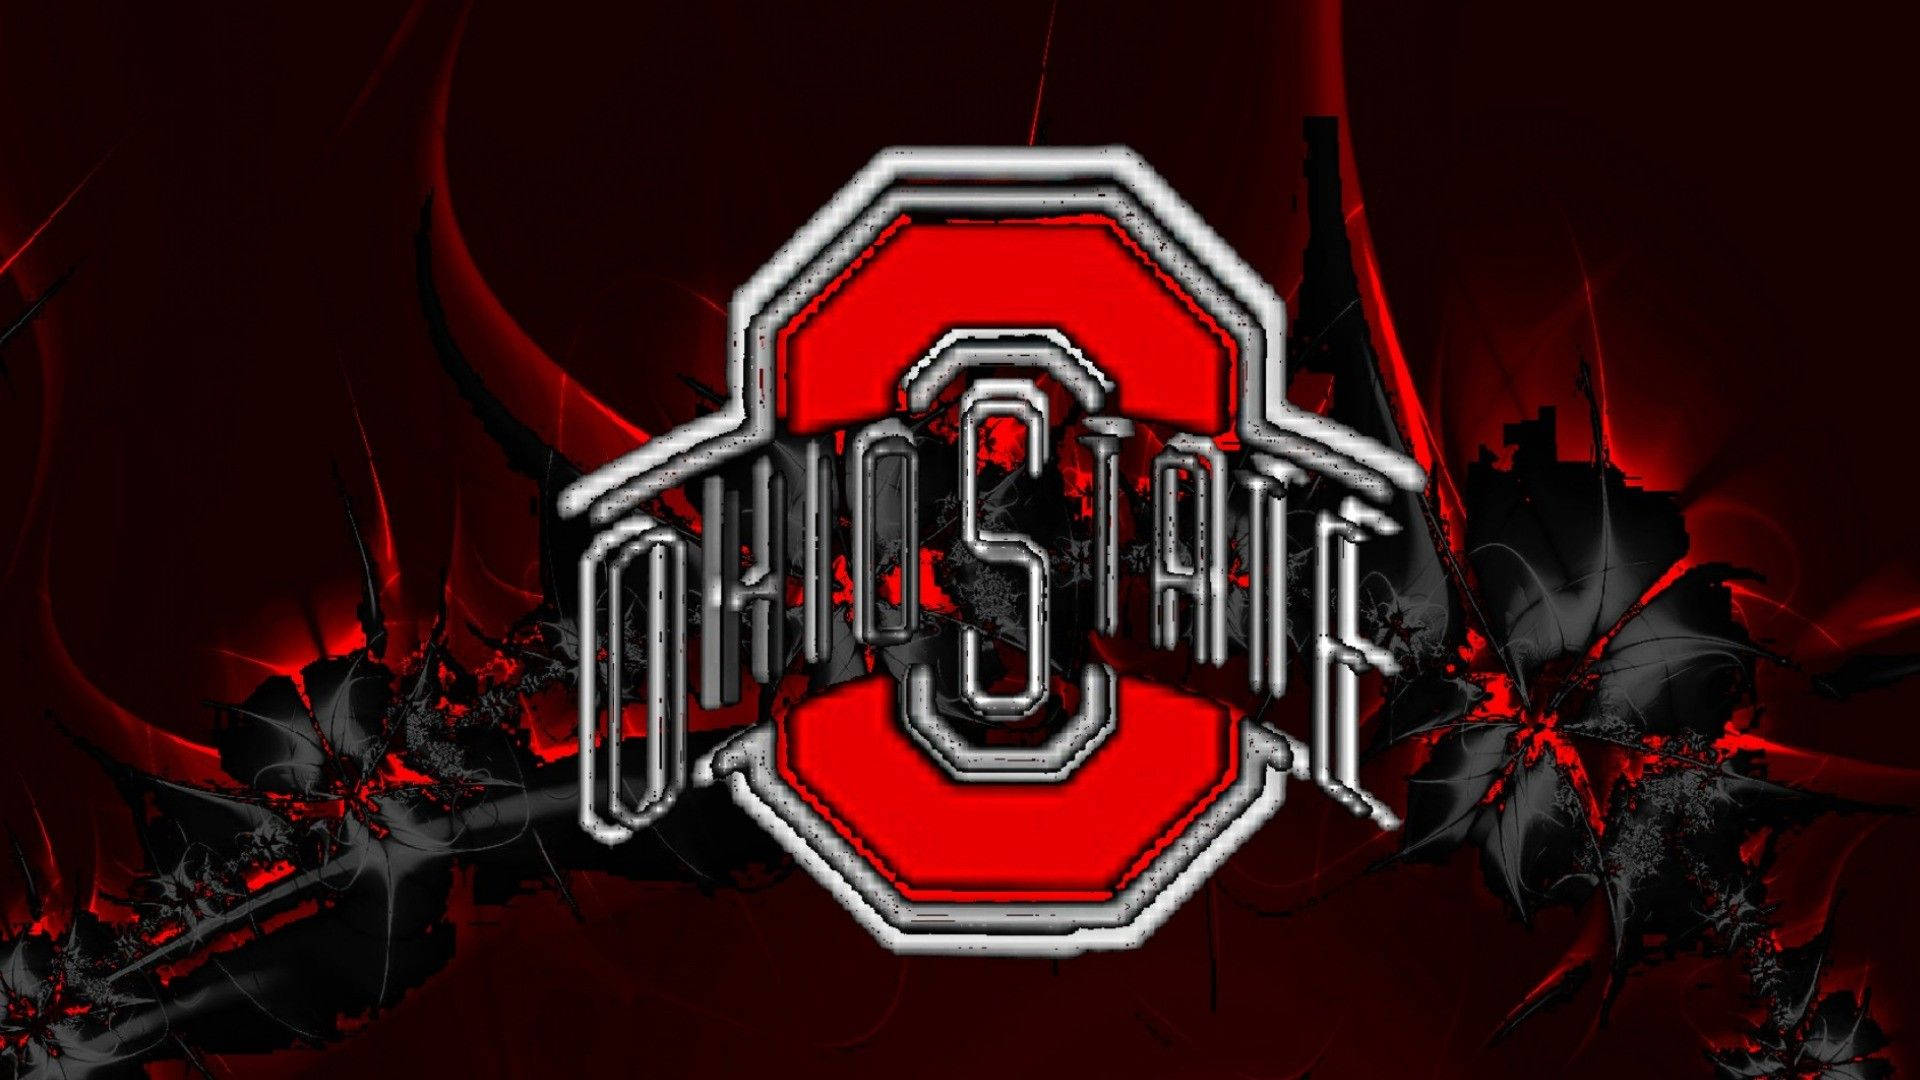 Ohio State 1920X1080 Wallpaper and Background Image